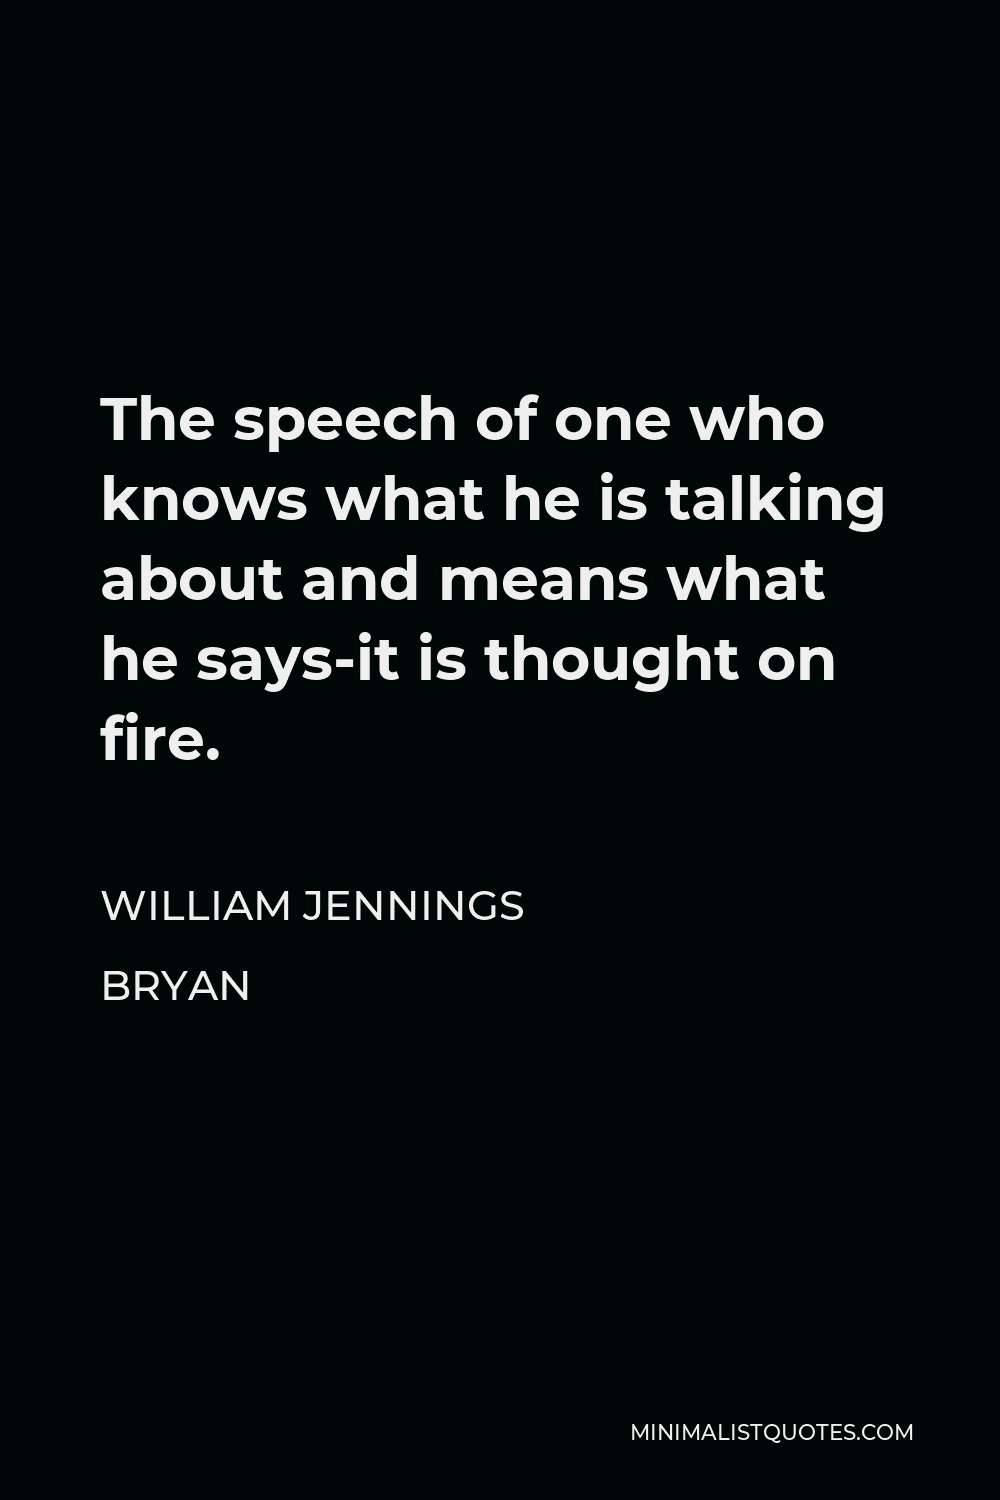 William Jennings Bryan Quote - The speech of one who knows what he is talking about and means what he says-it is thought on fire.